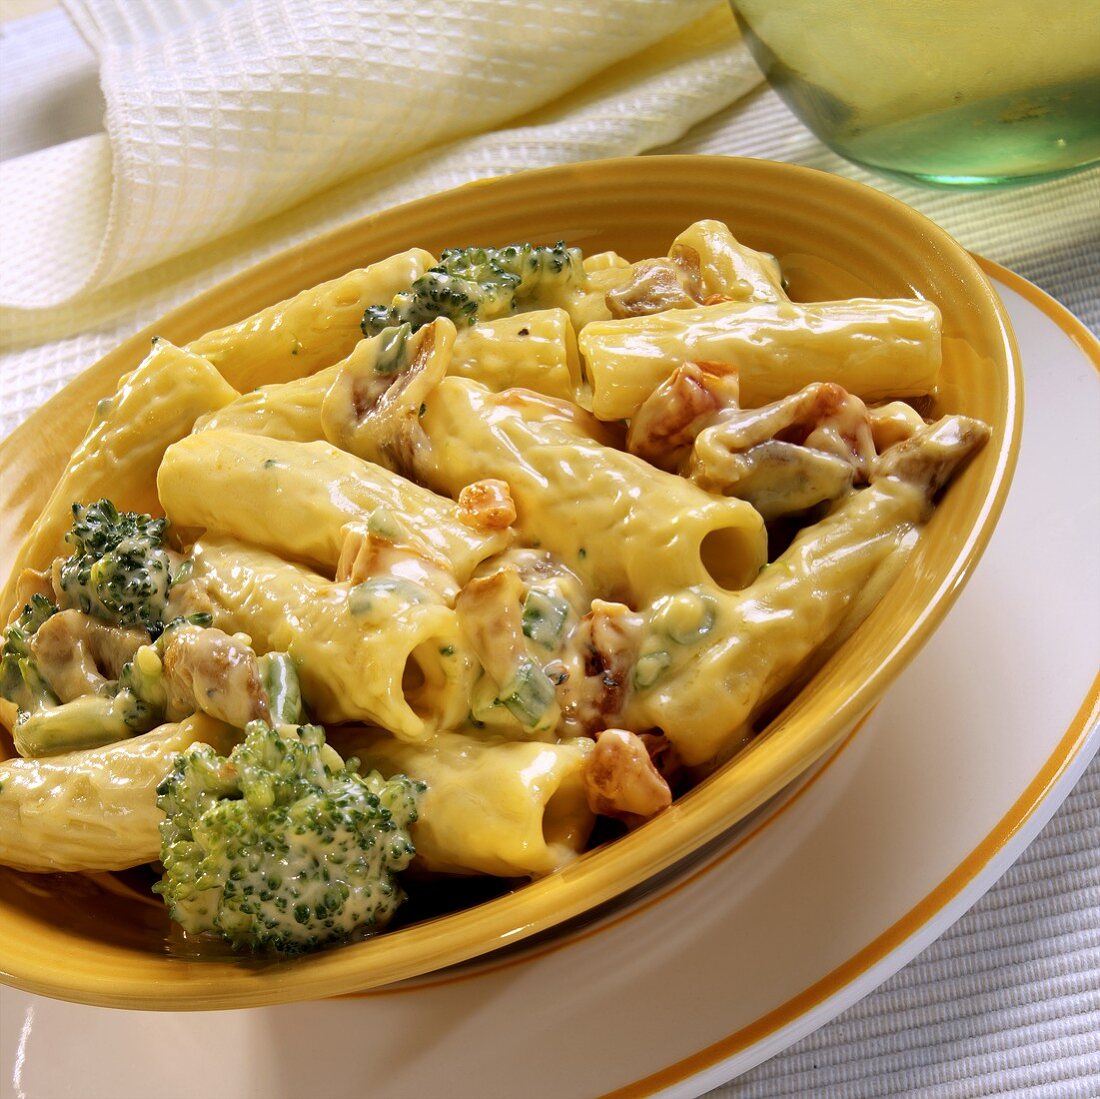 Rigatoni with broccoli, bacon and cheese sauce